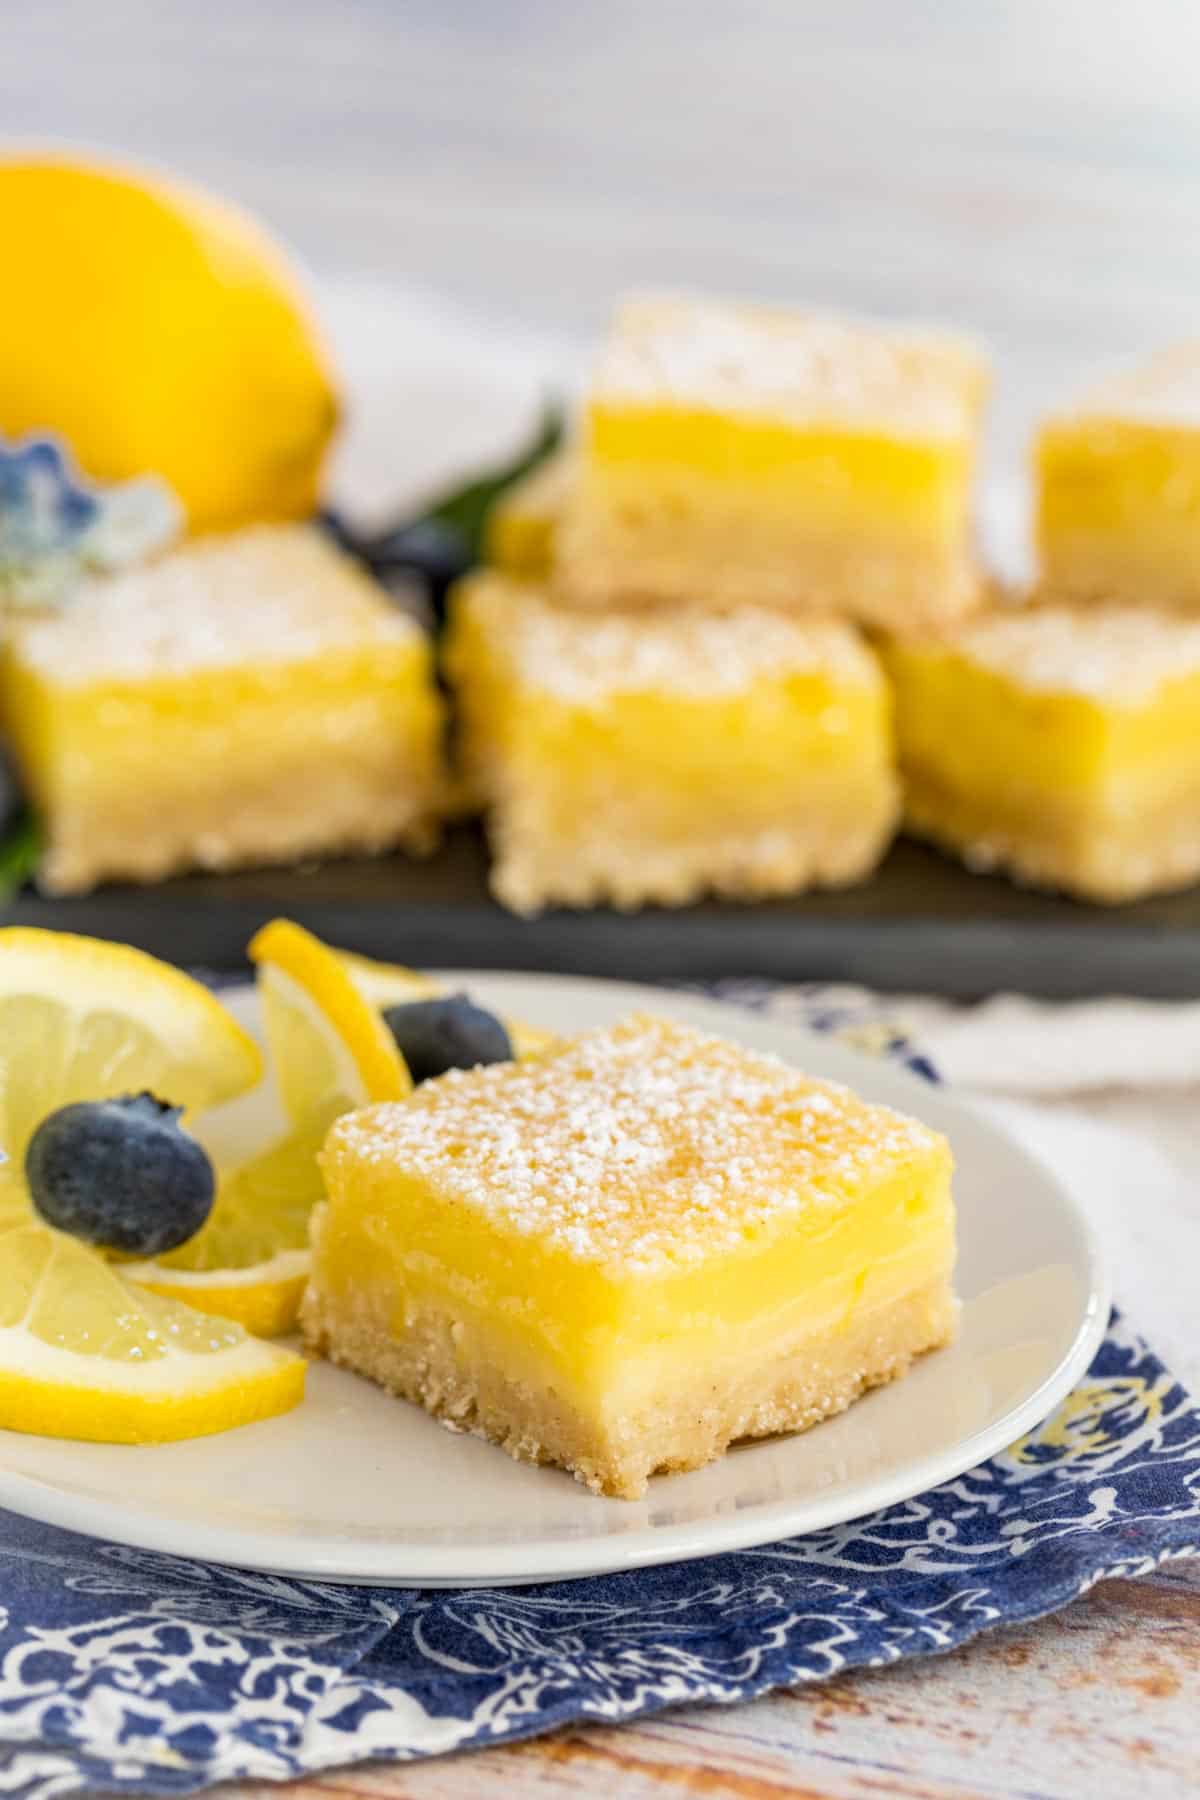 A lemon bar on a plate next to blueberries and lemon slices, with lemon bars in the background.